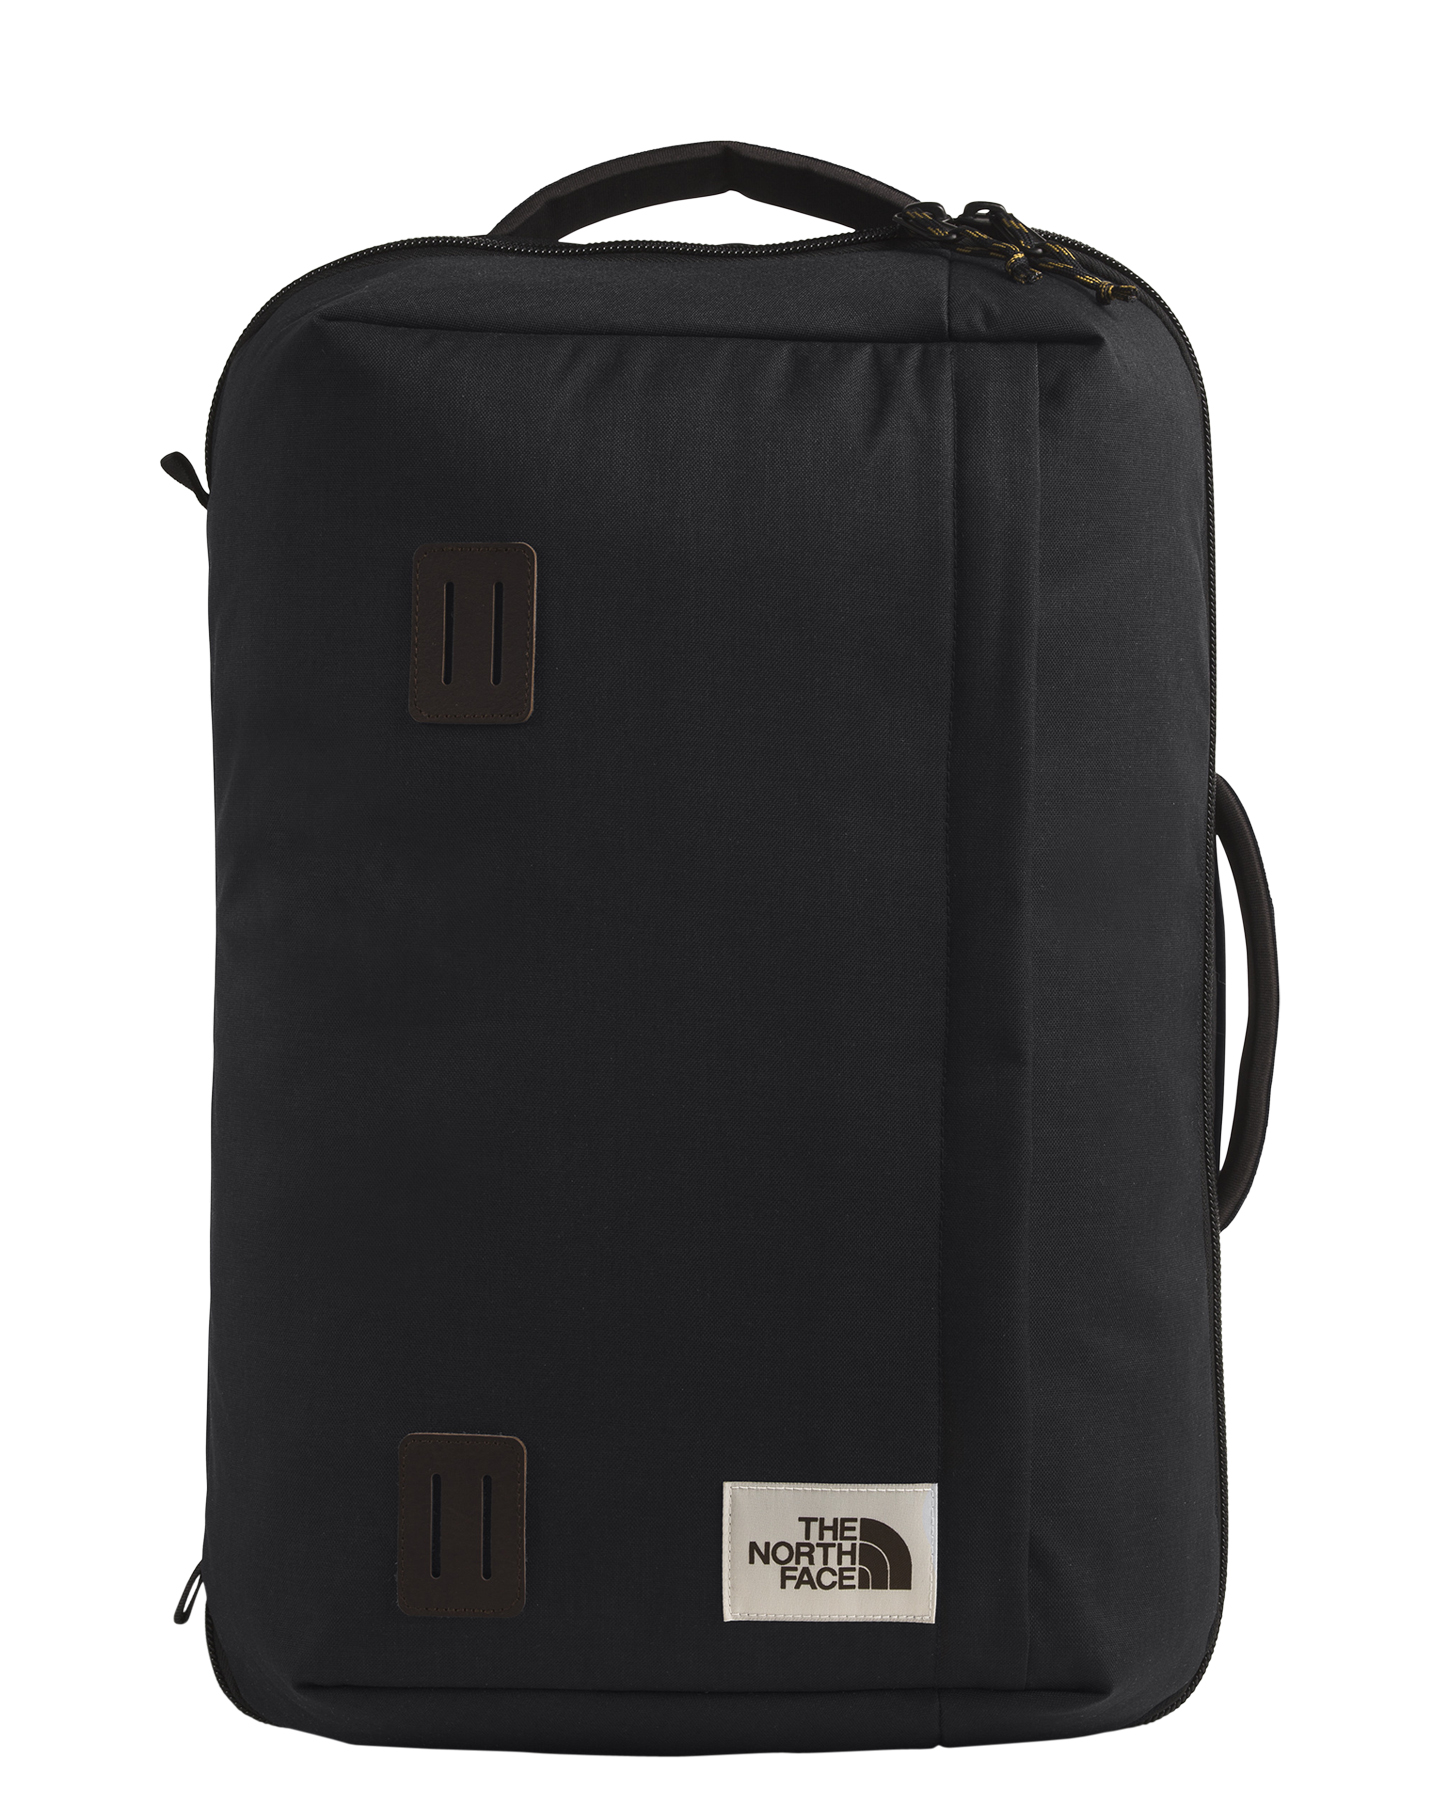 the north face mens travel bag